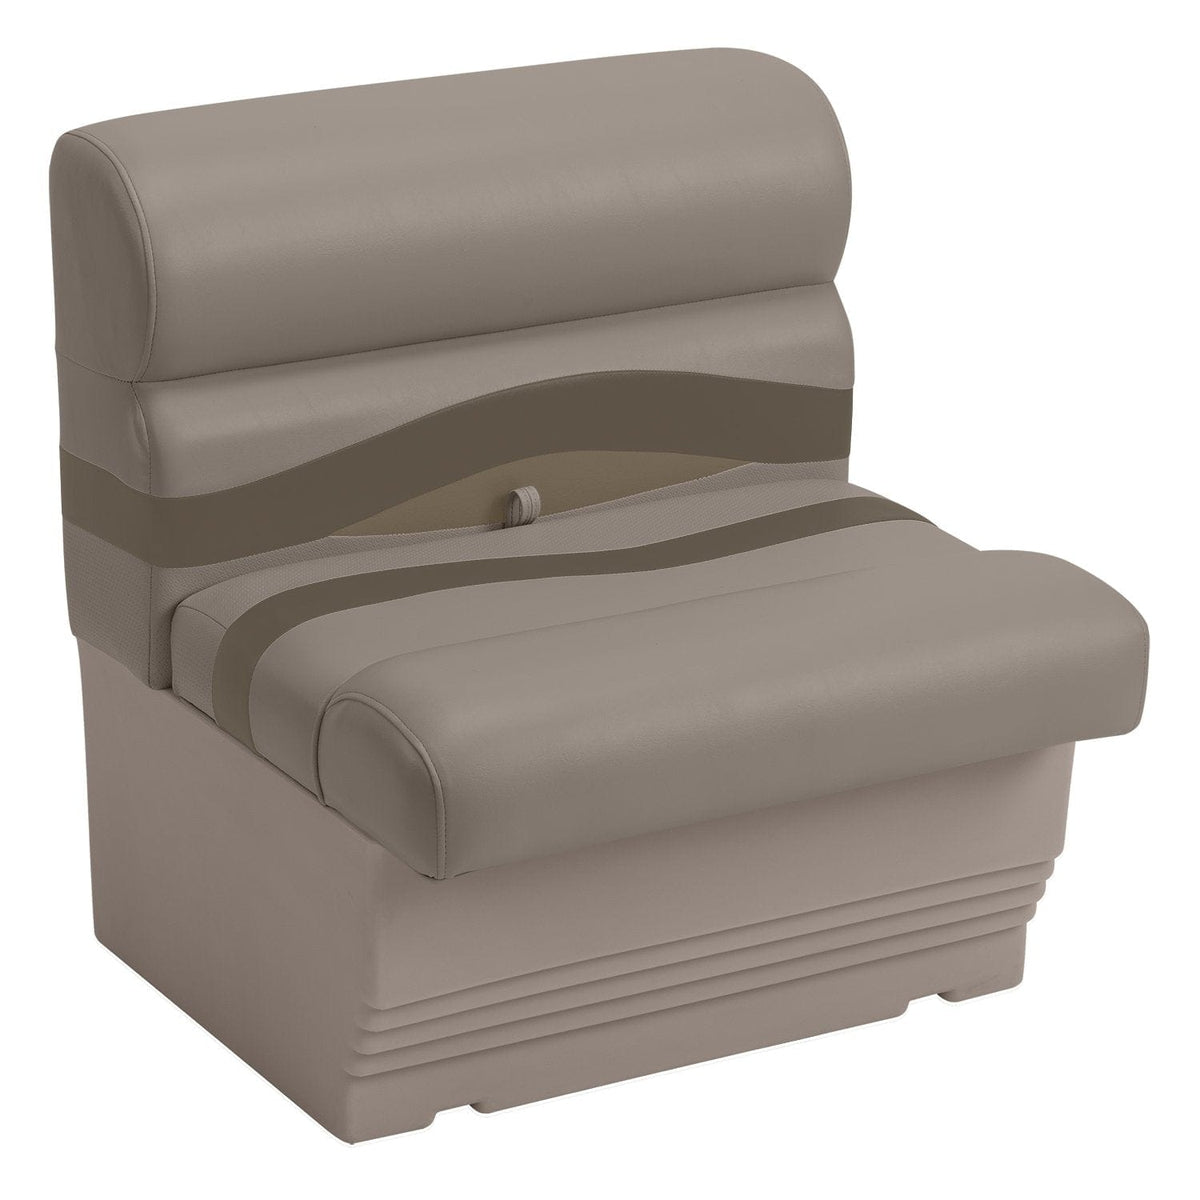 Wise Not Qualified for Free Shipping Wise 27" Bench Seat with Base #BM1143-1749